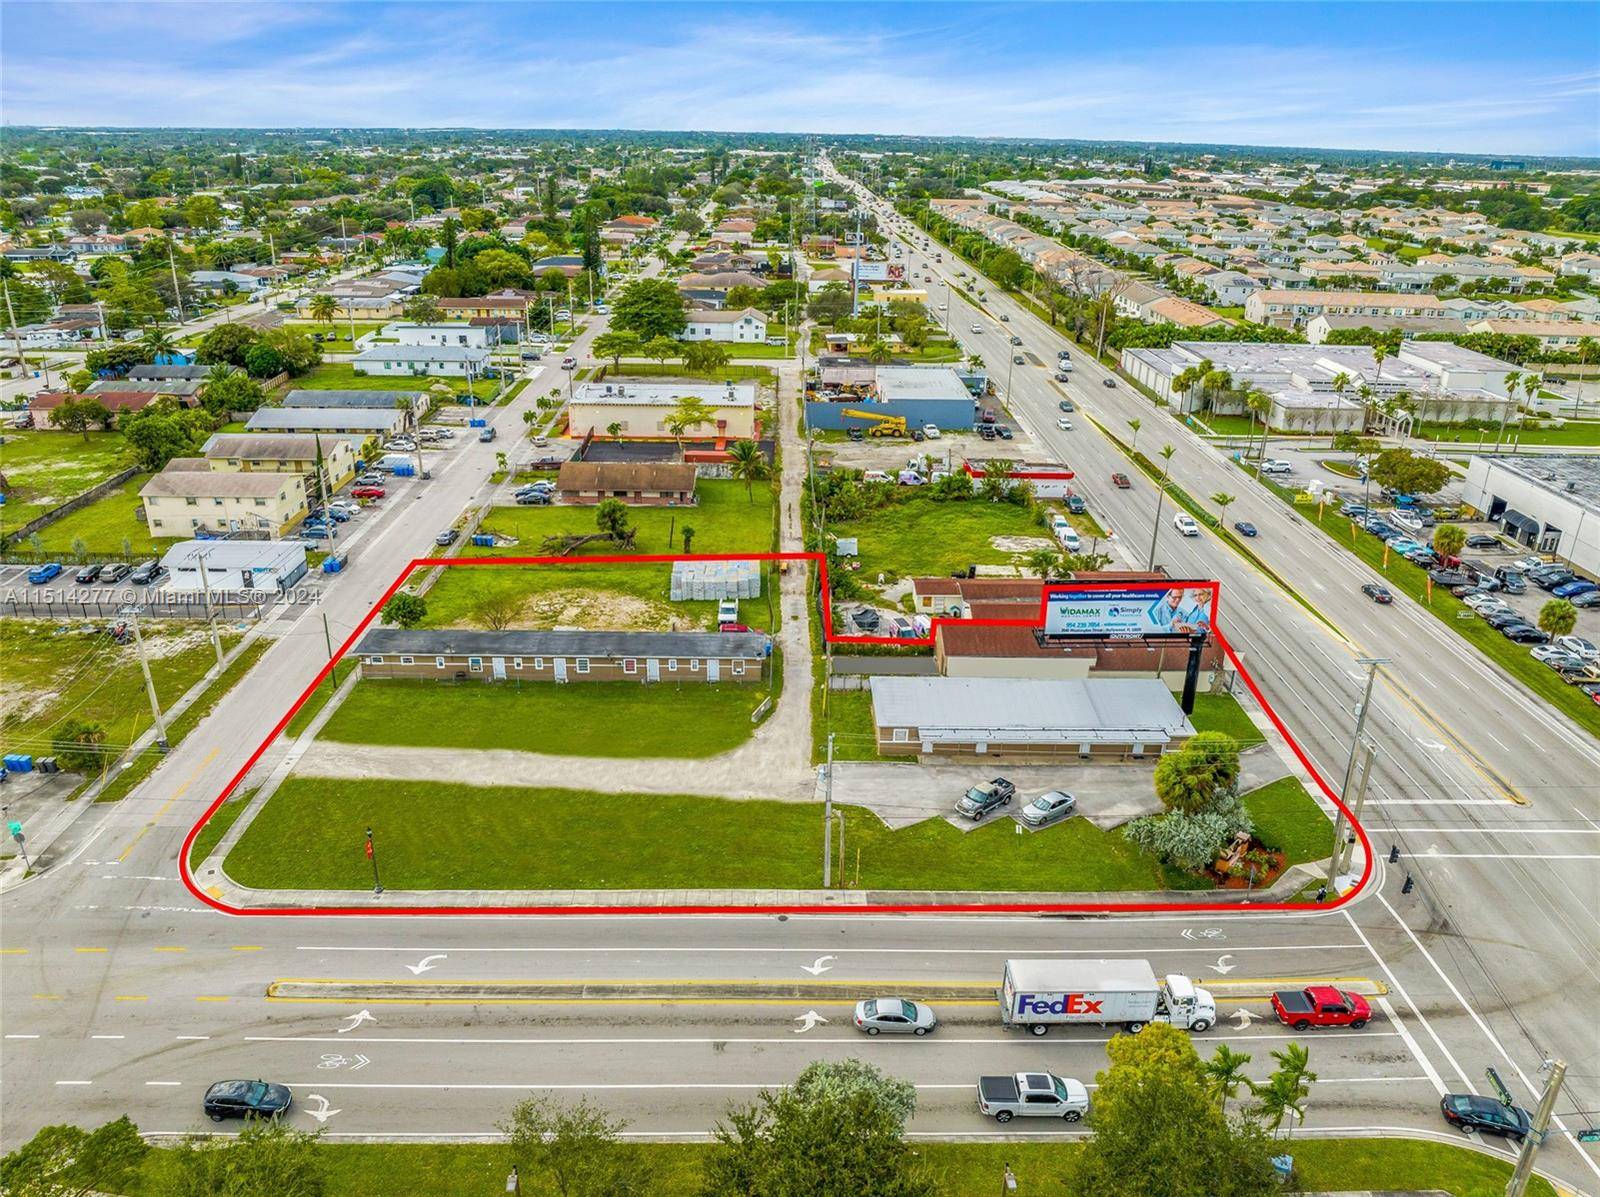 Located at 4004 Pembroke Rd on the bustling border of Hollywood and West Park, this exceptional development site presents an exciting opportunity for savvy investors and developers.